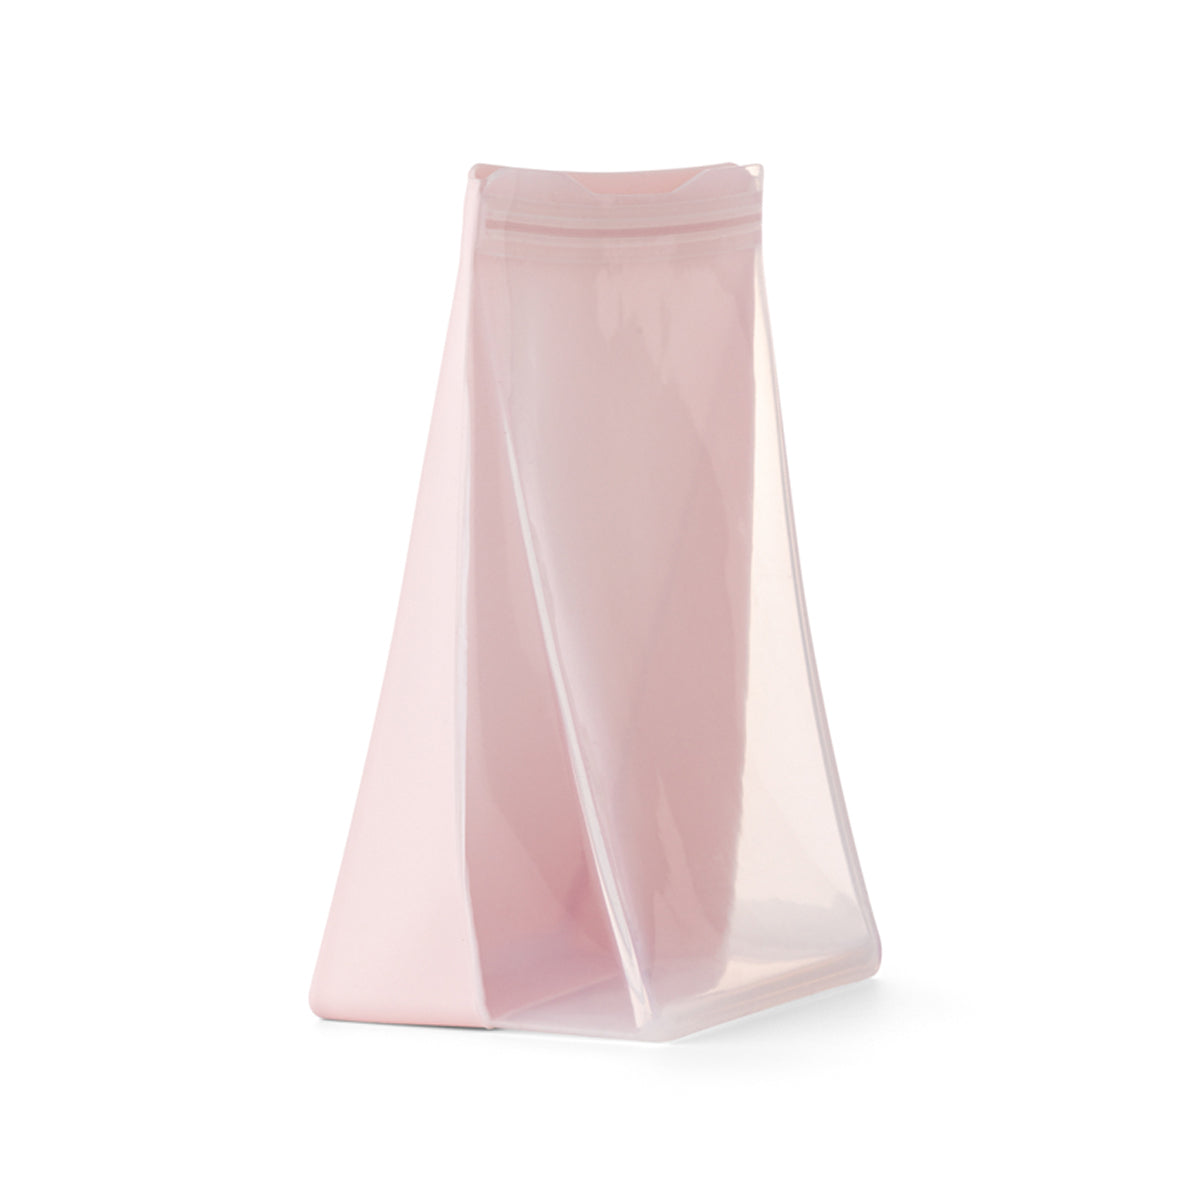 Reusable Silicone Bag Stand Up 1.5L Blush